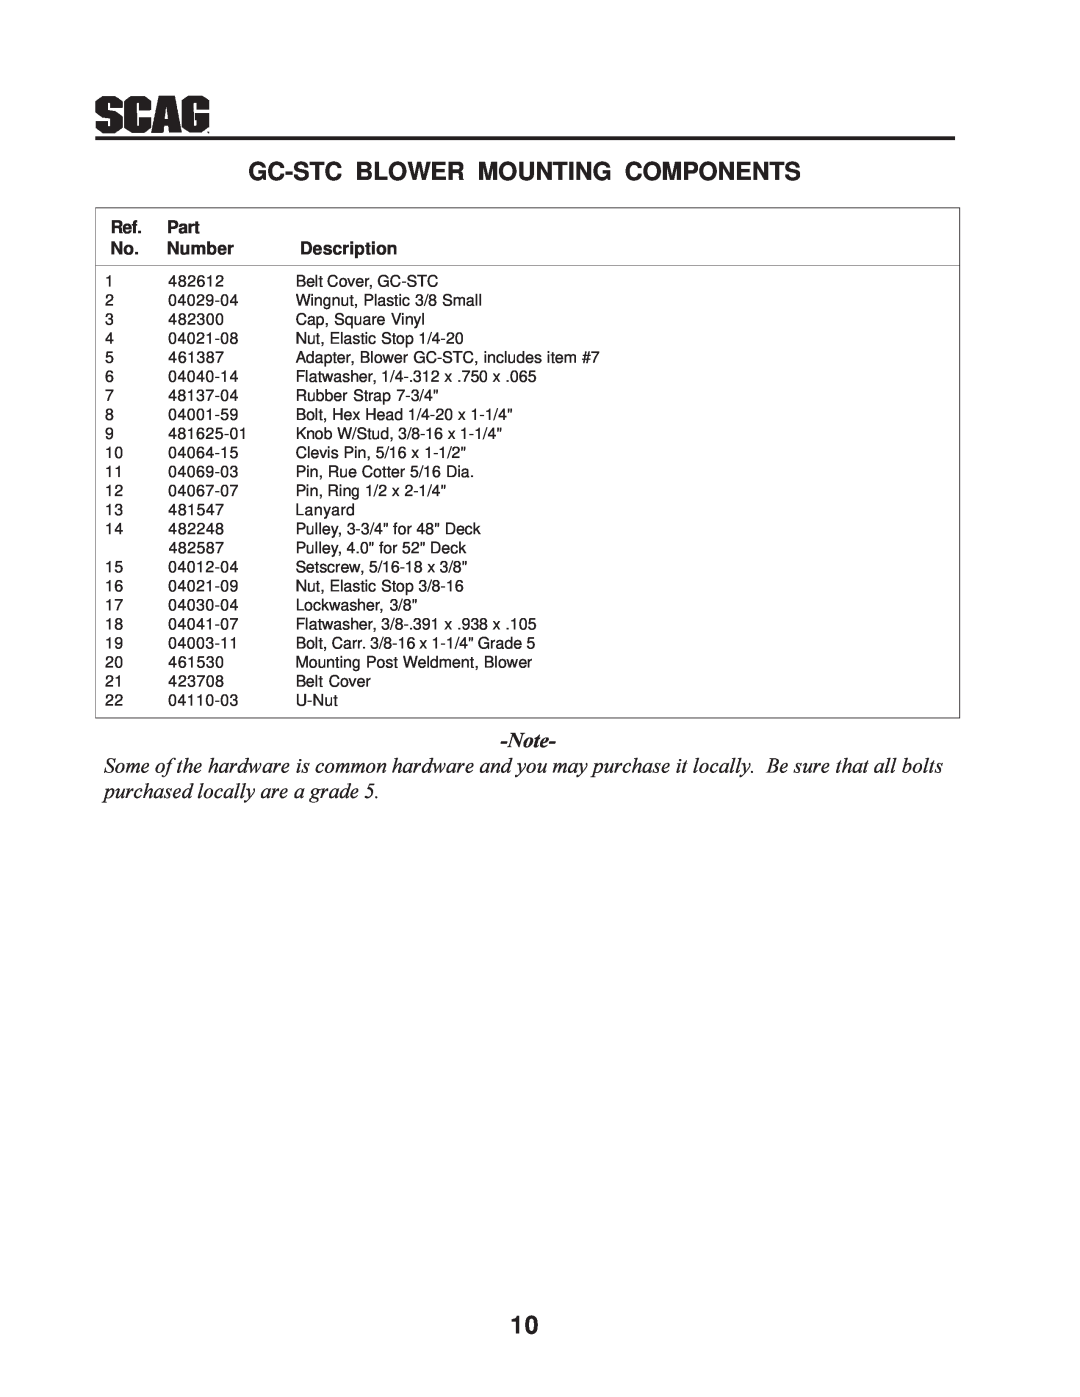 Scag Power Equipment GC-STC manual Gc-Stc Blower Mounting Components, Part, Number, Description 